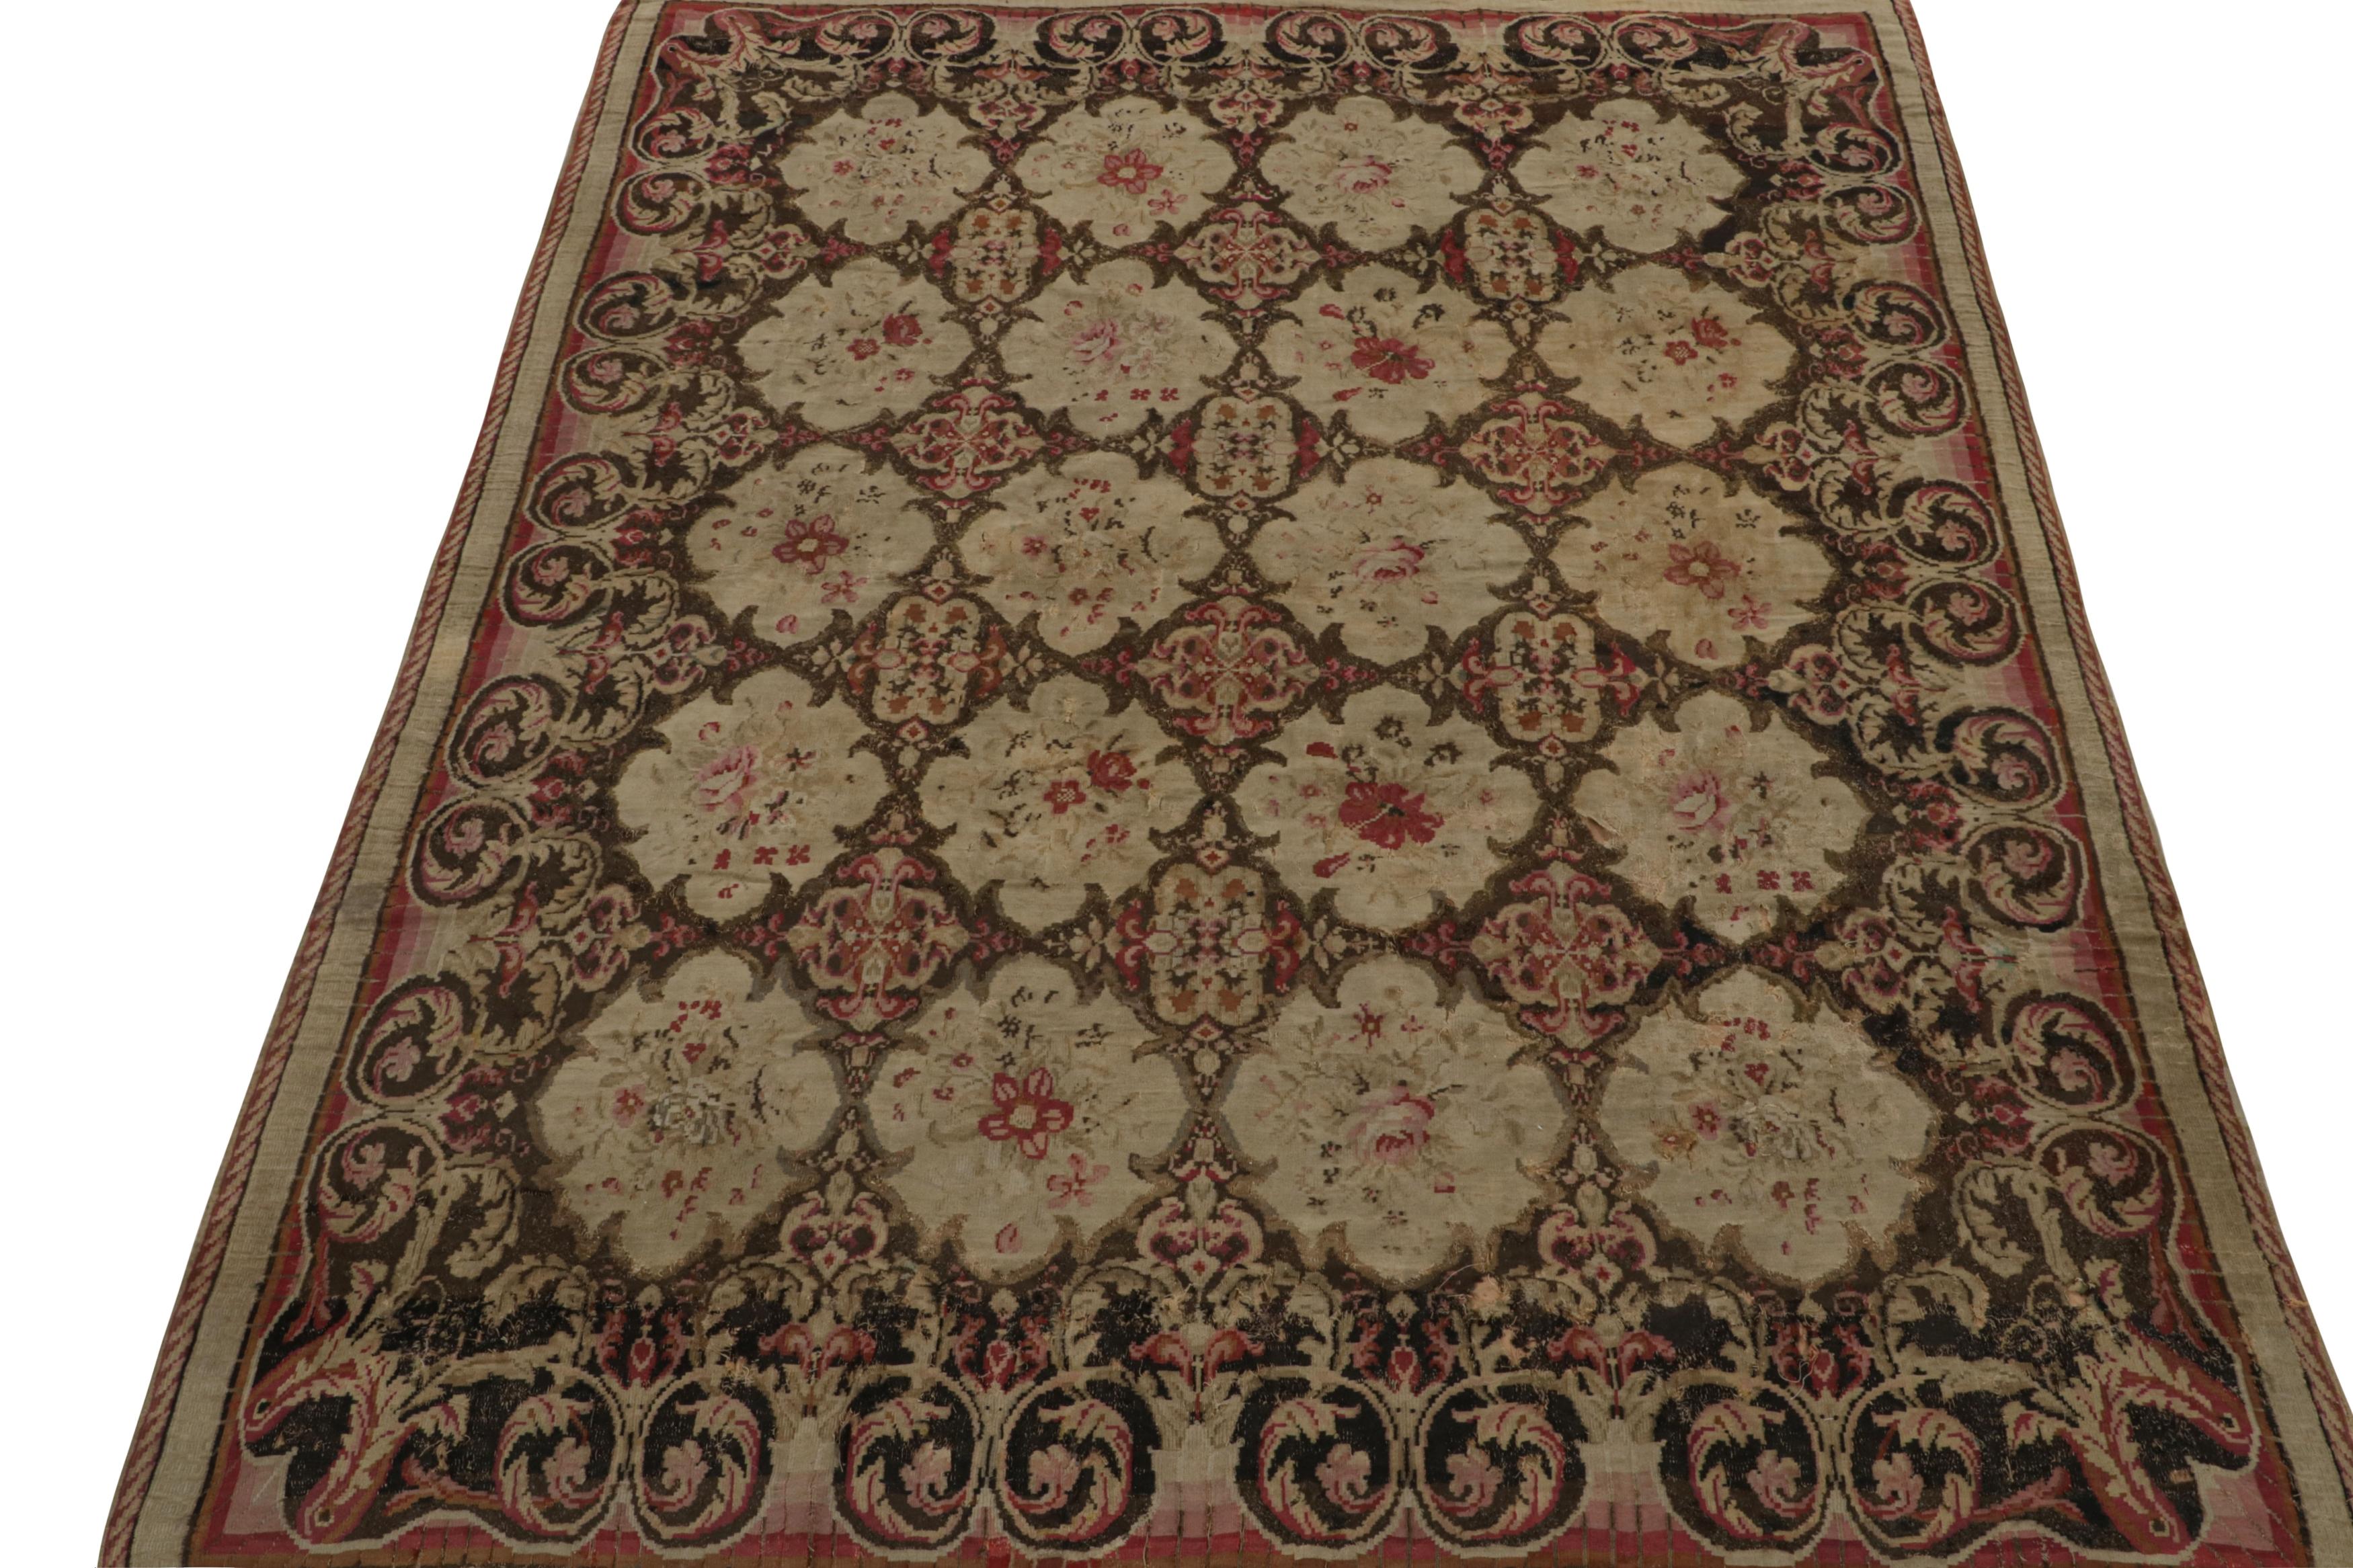 Romanian Antique Bessarabian Kilim rug in brown, with Floral patterns, from Rug & Kilim For Sale